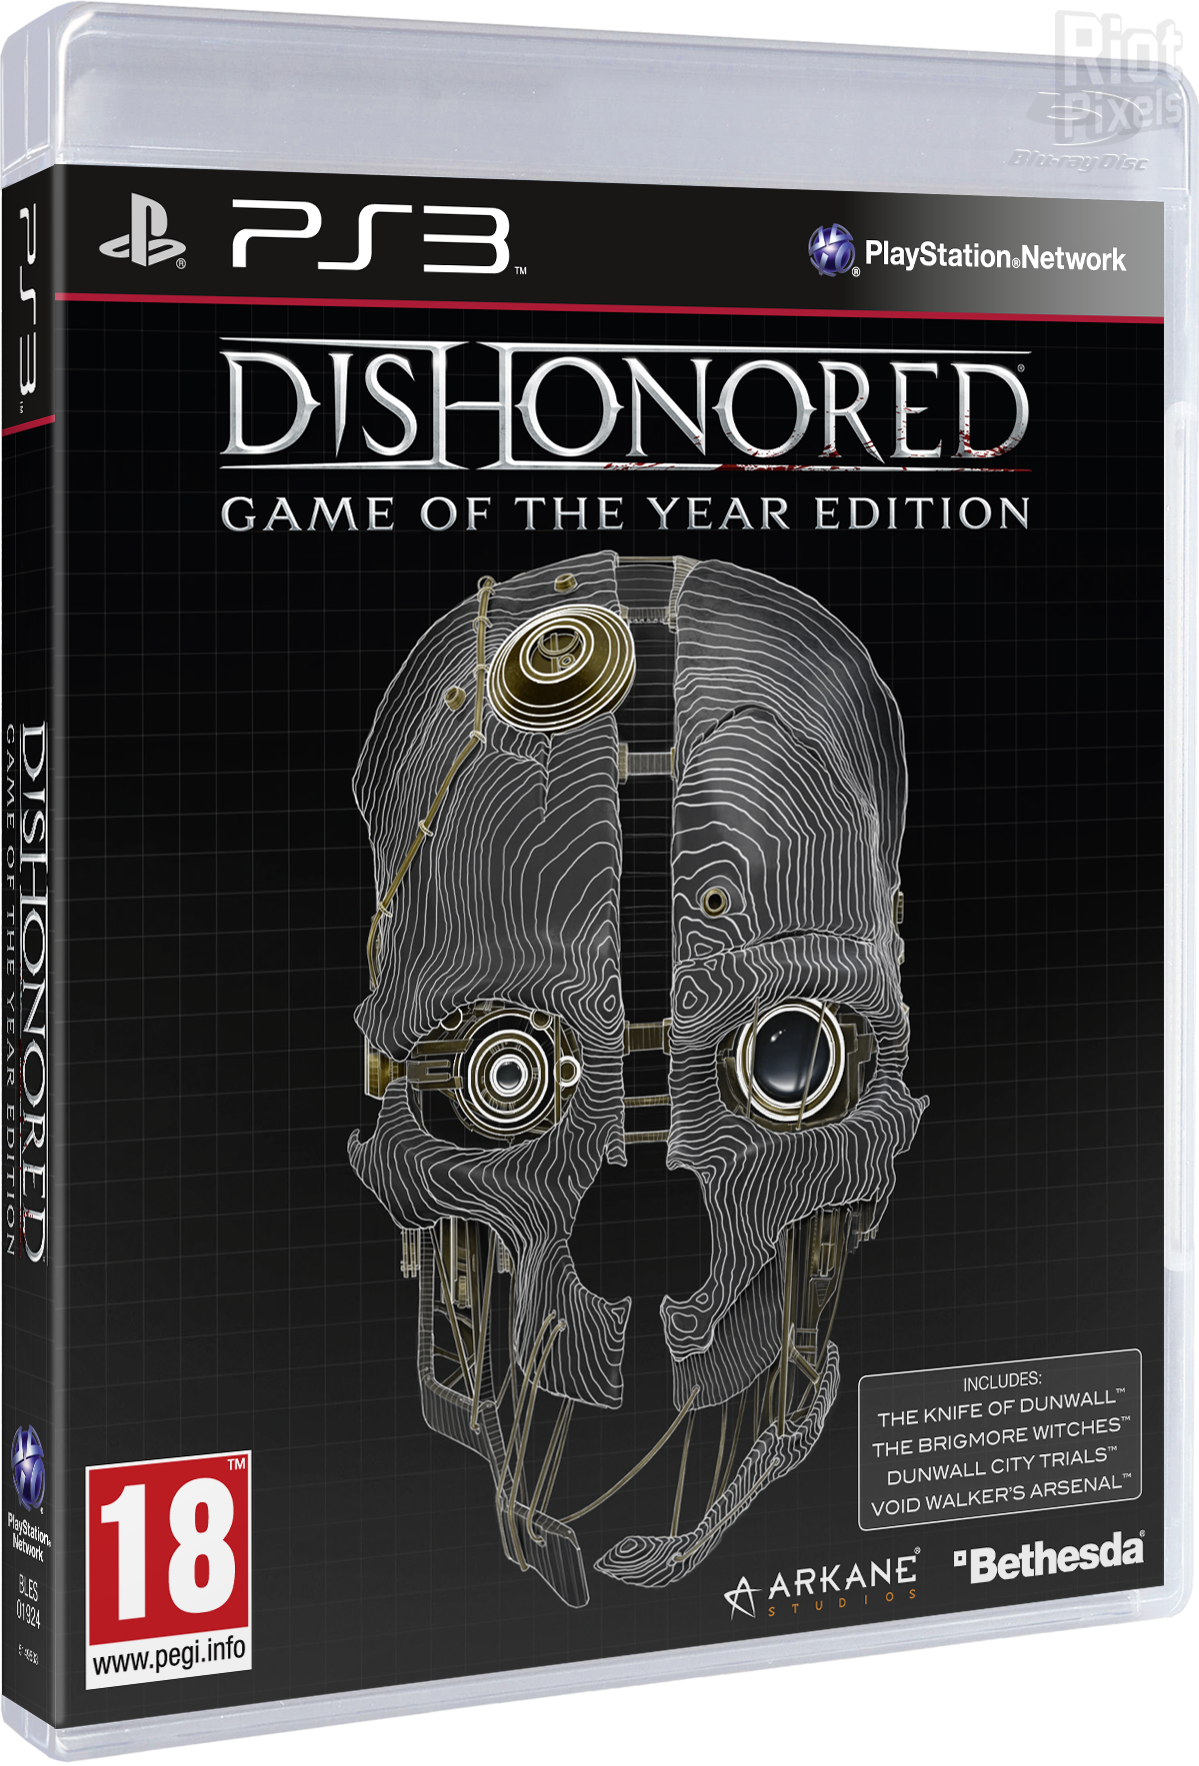 Dishonored: Game of the Year Edition. 